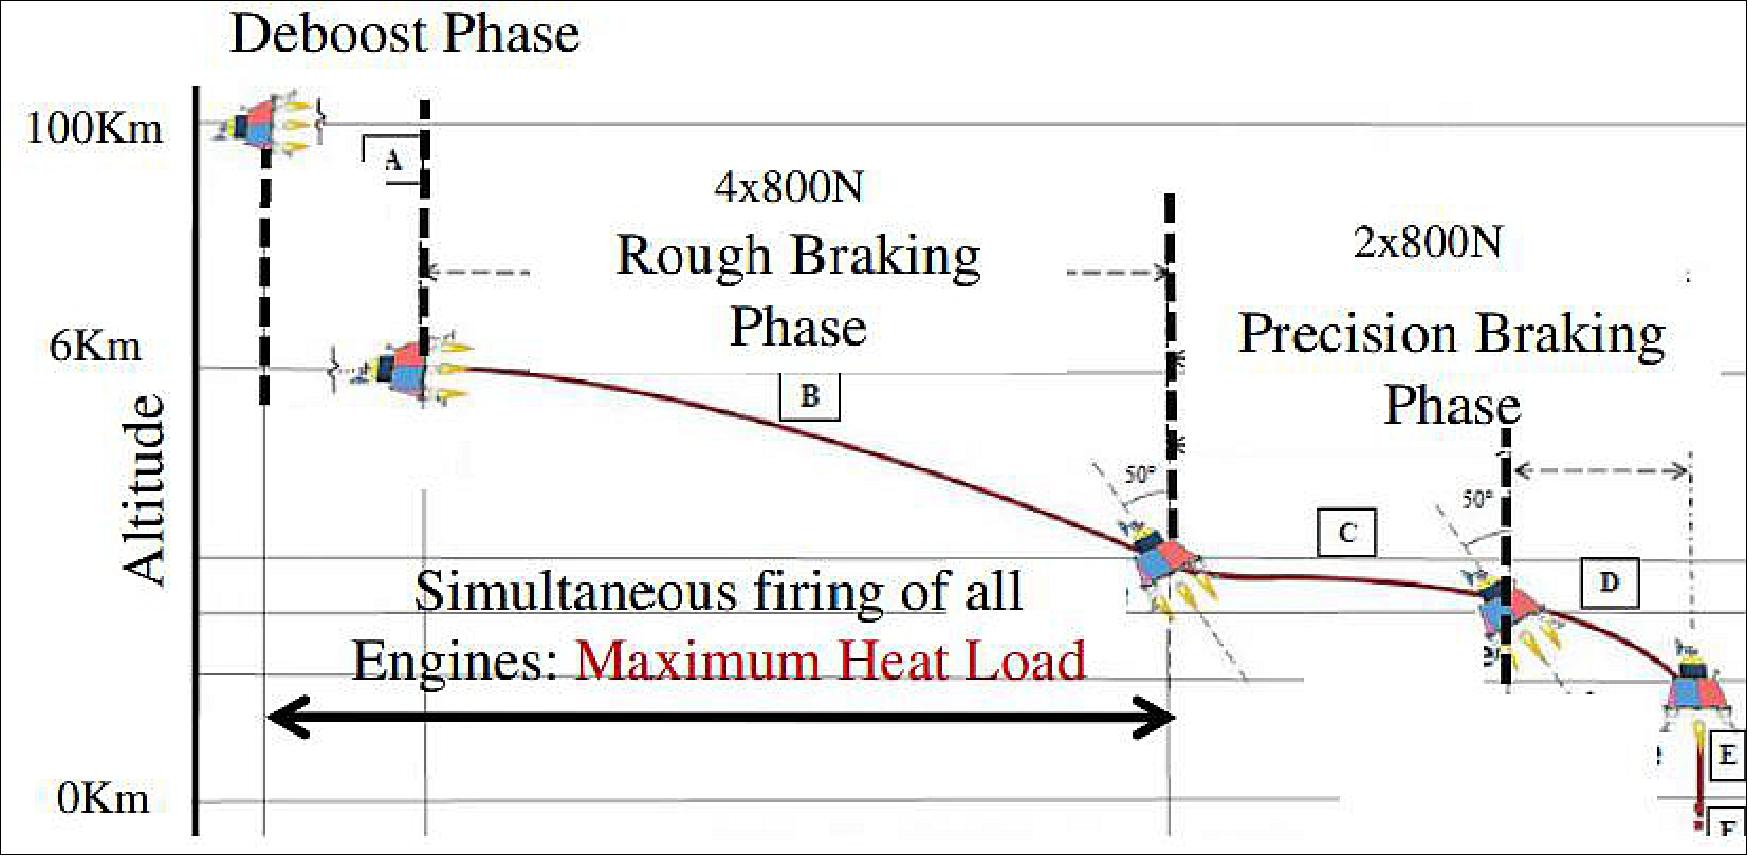 Figure 6: Chandrayaan-2 Lunar Lander (with Rover) Soft Landing Sequence (image credit: ISRO)